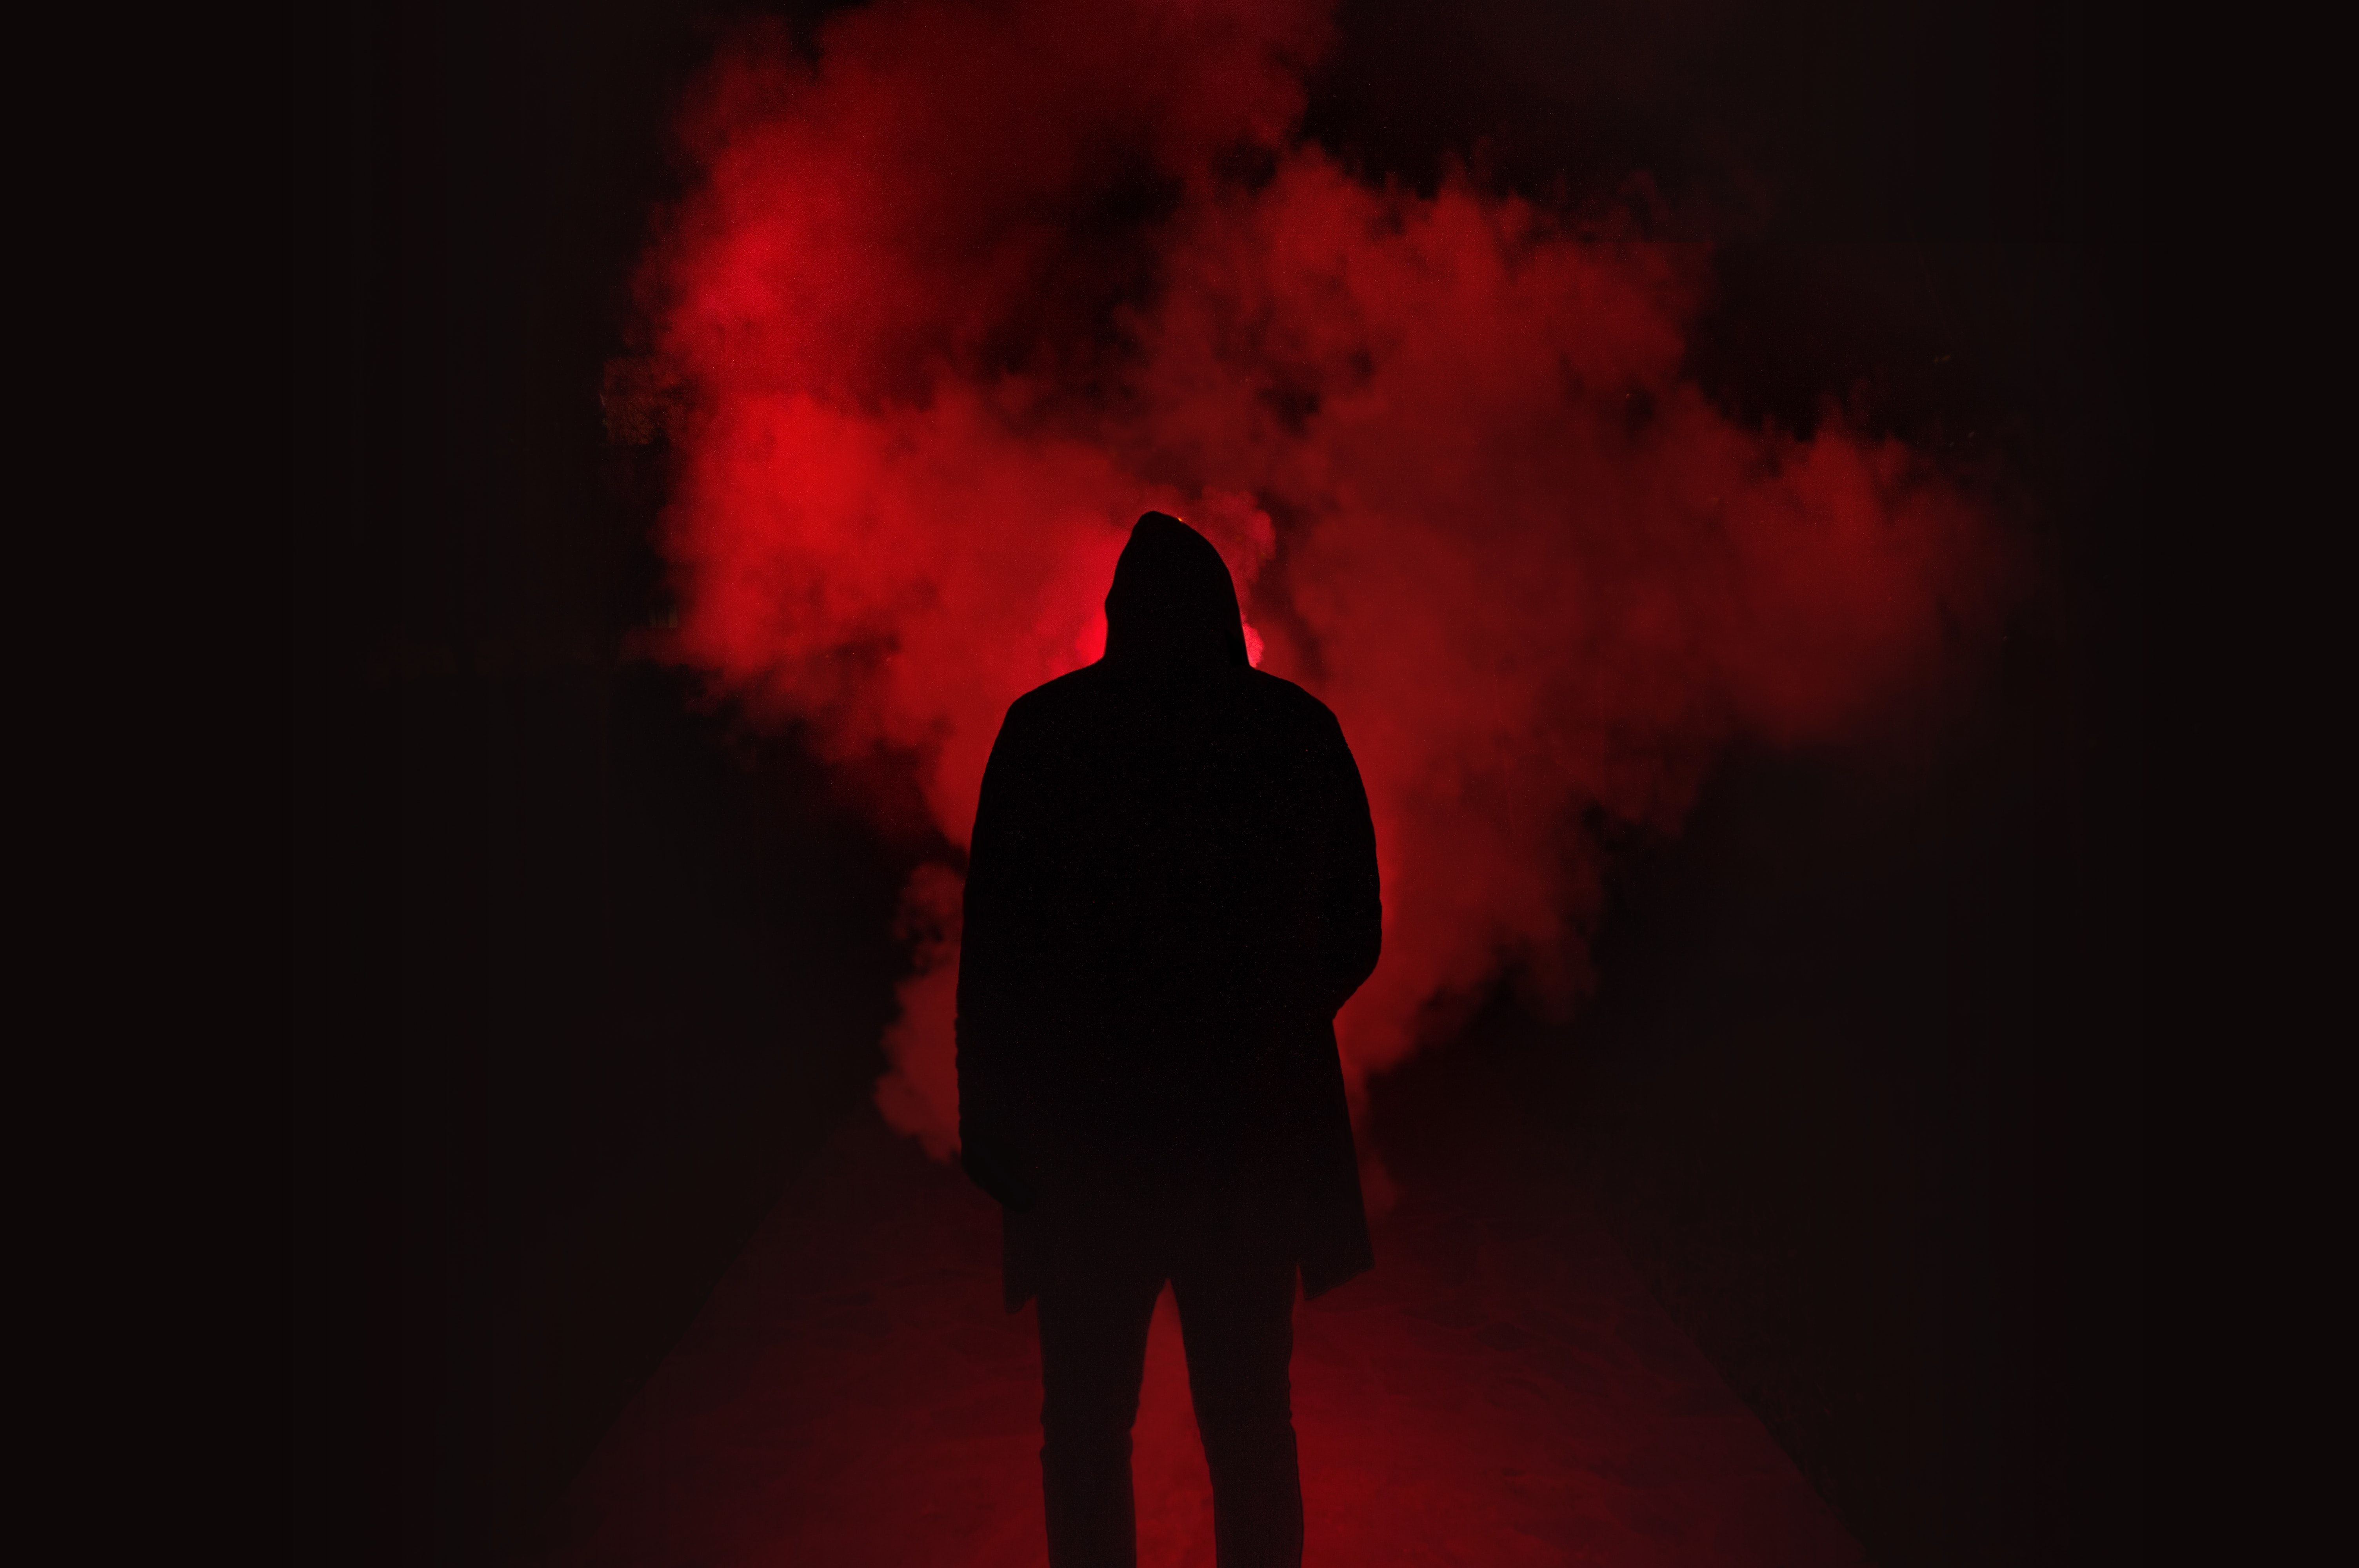 A hooded figure stands in a red smog. - Smoke